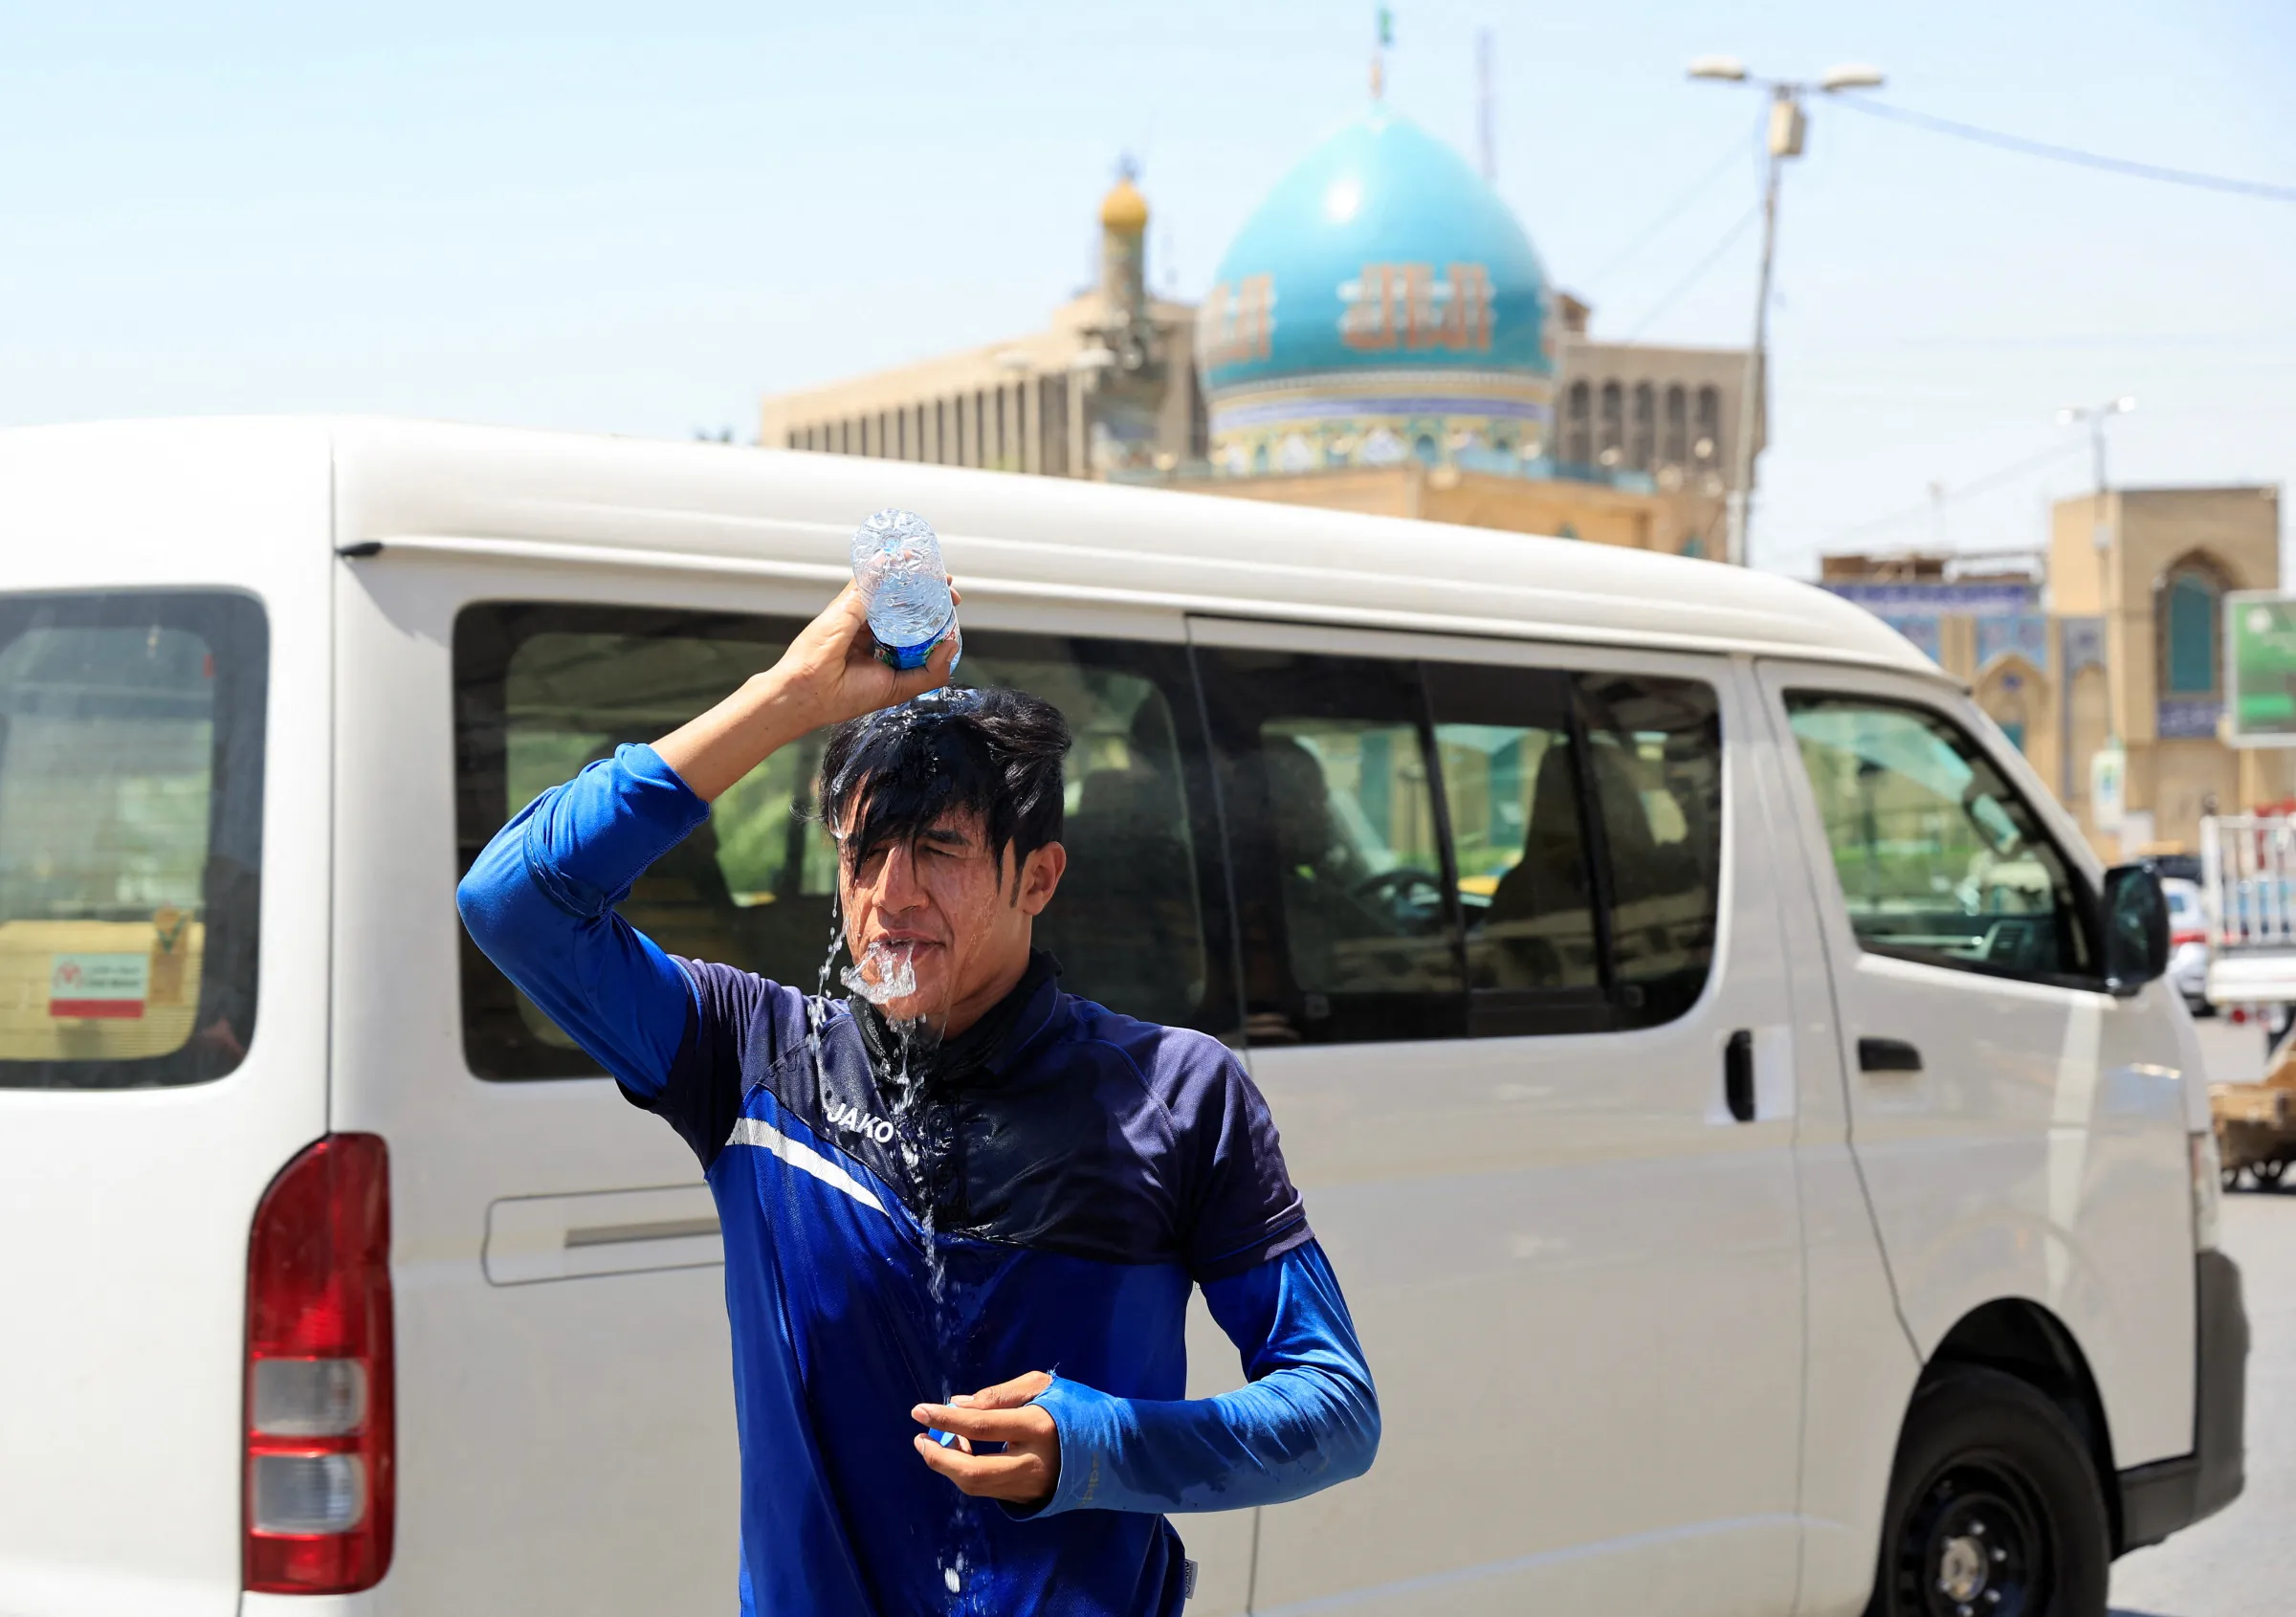 A man pours a bottle of water on his head to cool off at a street during high temperature in Baghdad, Iraq, July 19, 2022. REUTERS/Thaier Al-Sudani